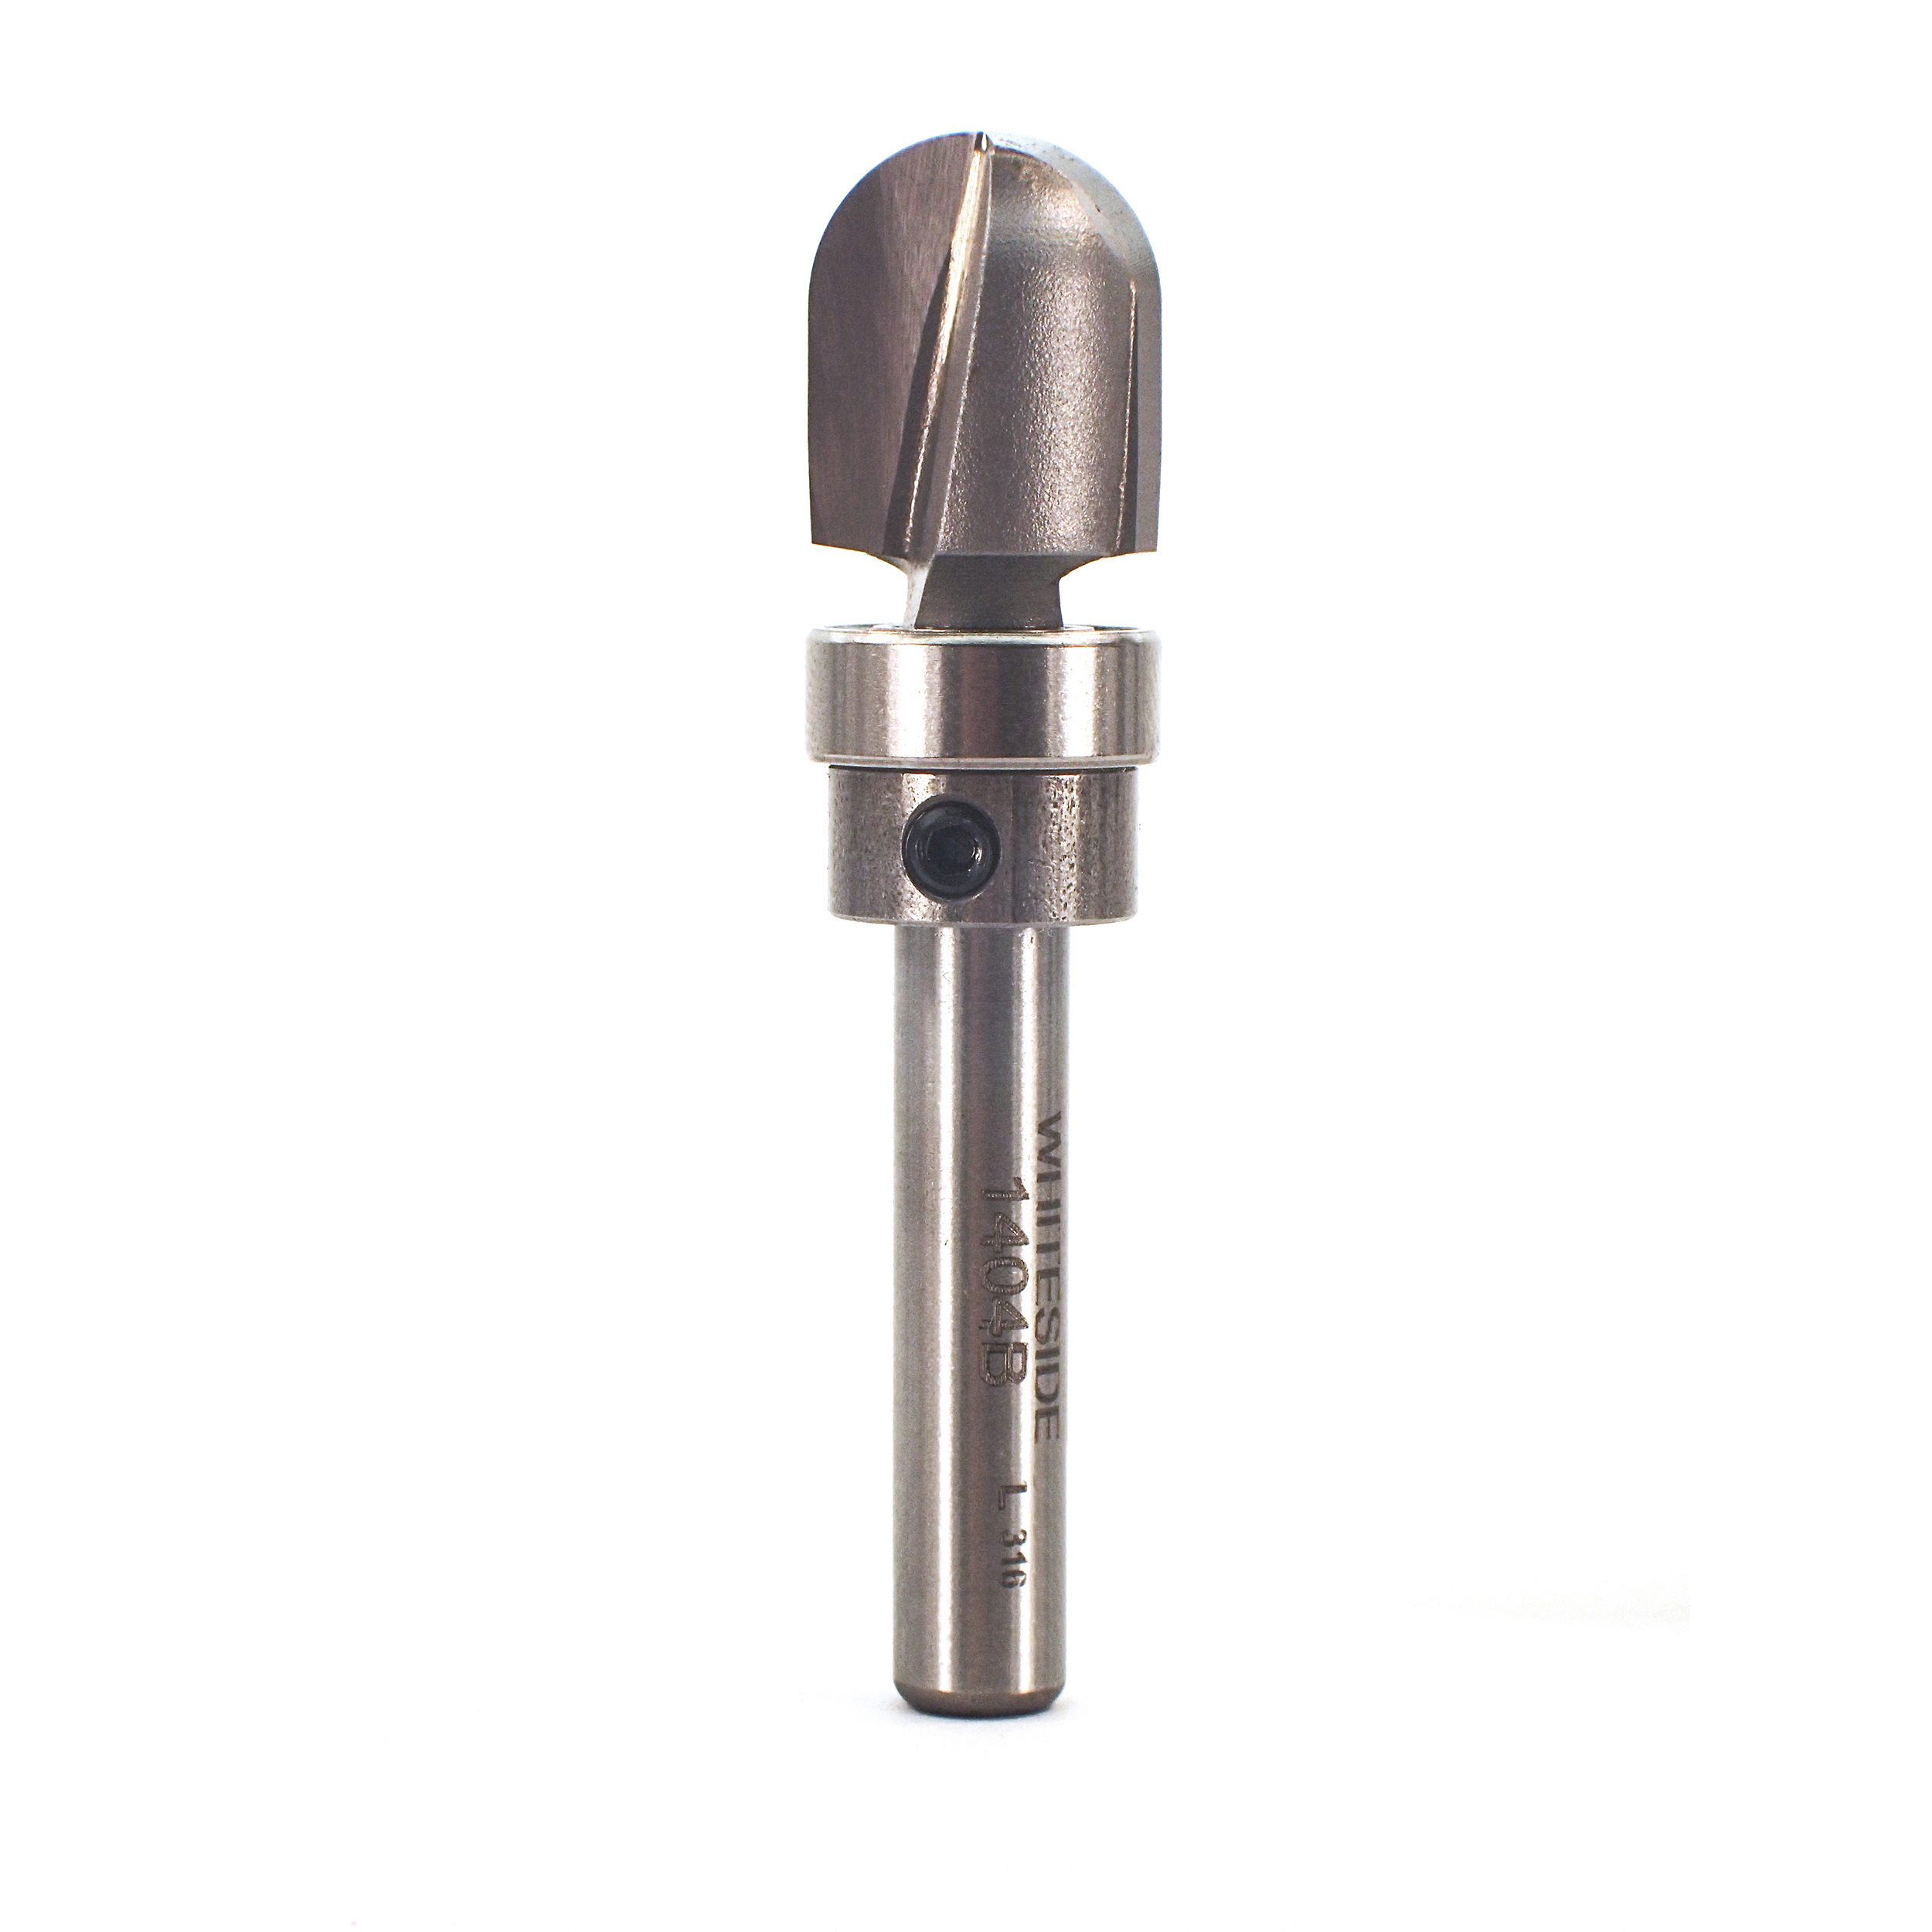 1404b B9 Bearing Round Nose Router Bit With Bearing Guide 1/4" R X 1/2" D X 5/8" Cl